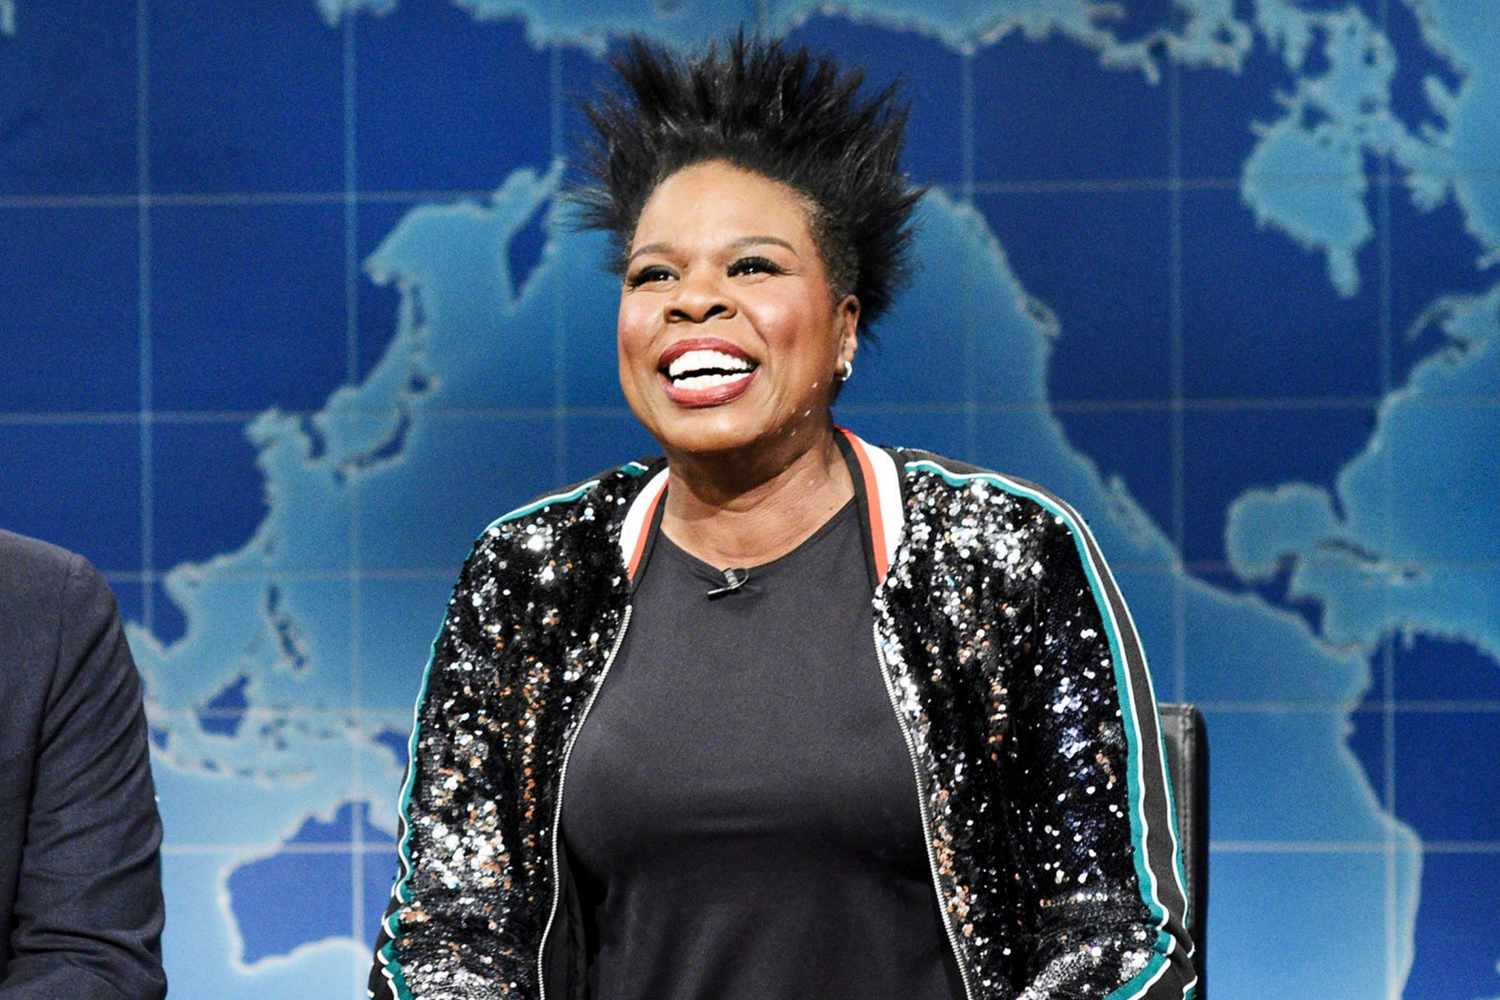 Leslie Jones says she doesn't miss 'Saturday Night Live' 'at all': 'I wasn't very free there' - Entertainment Weekly